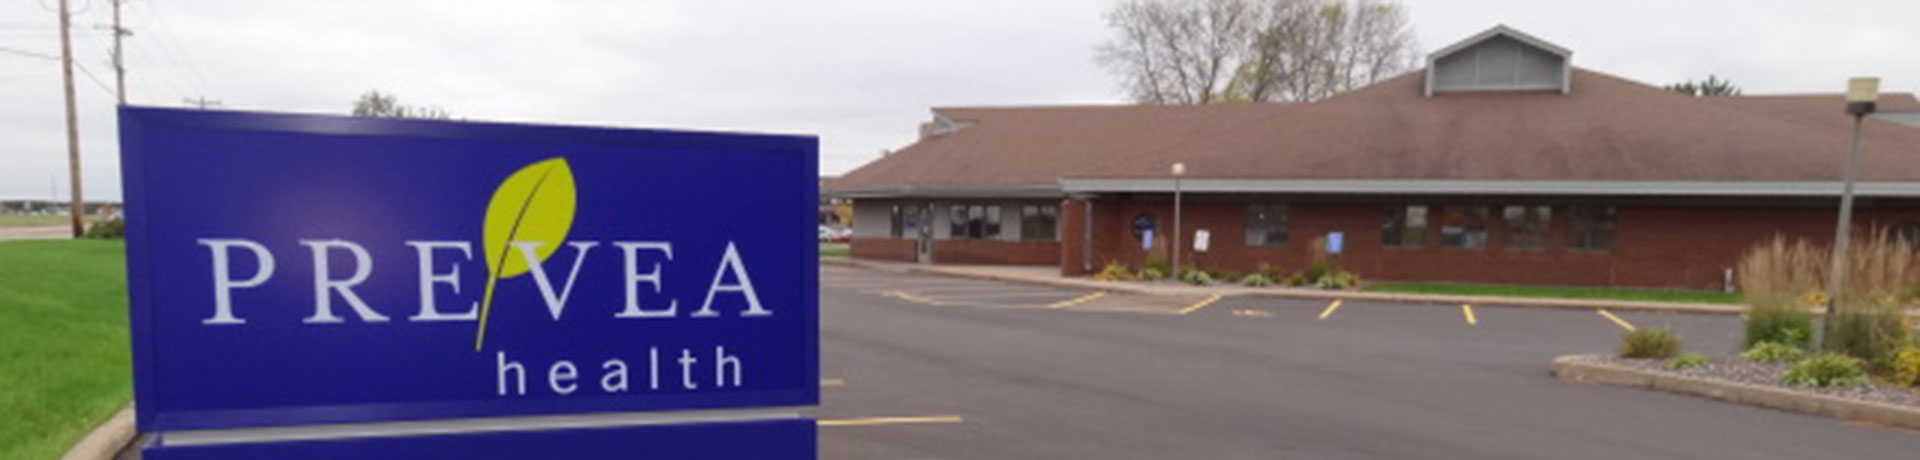 Prevea Medical Services Building 2449 Cty Hwy